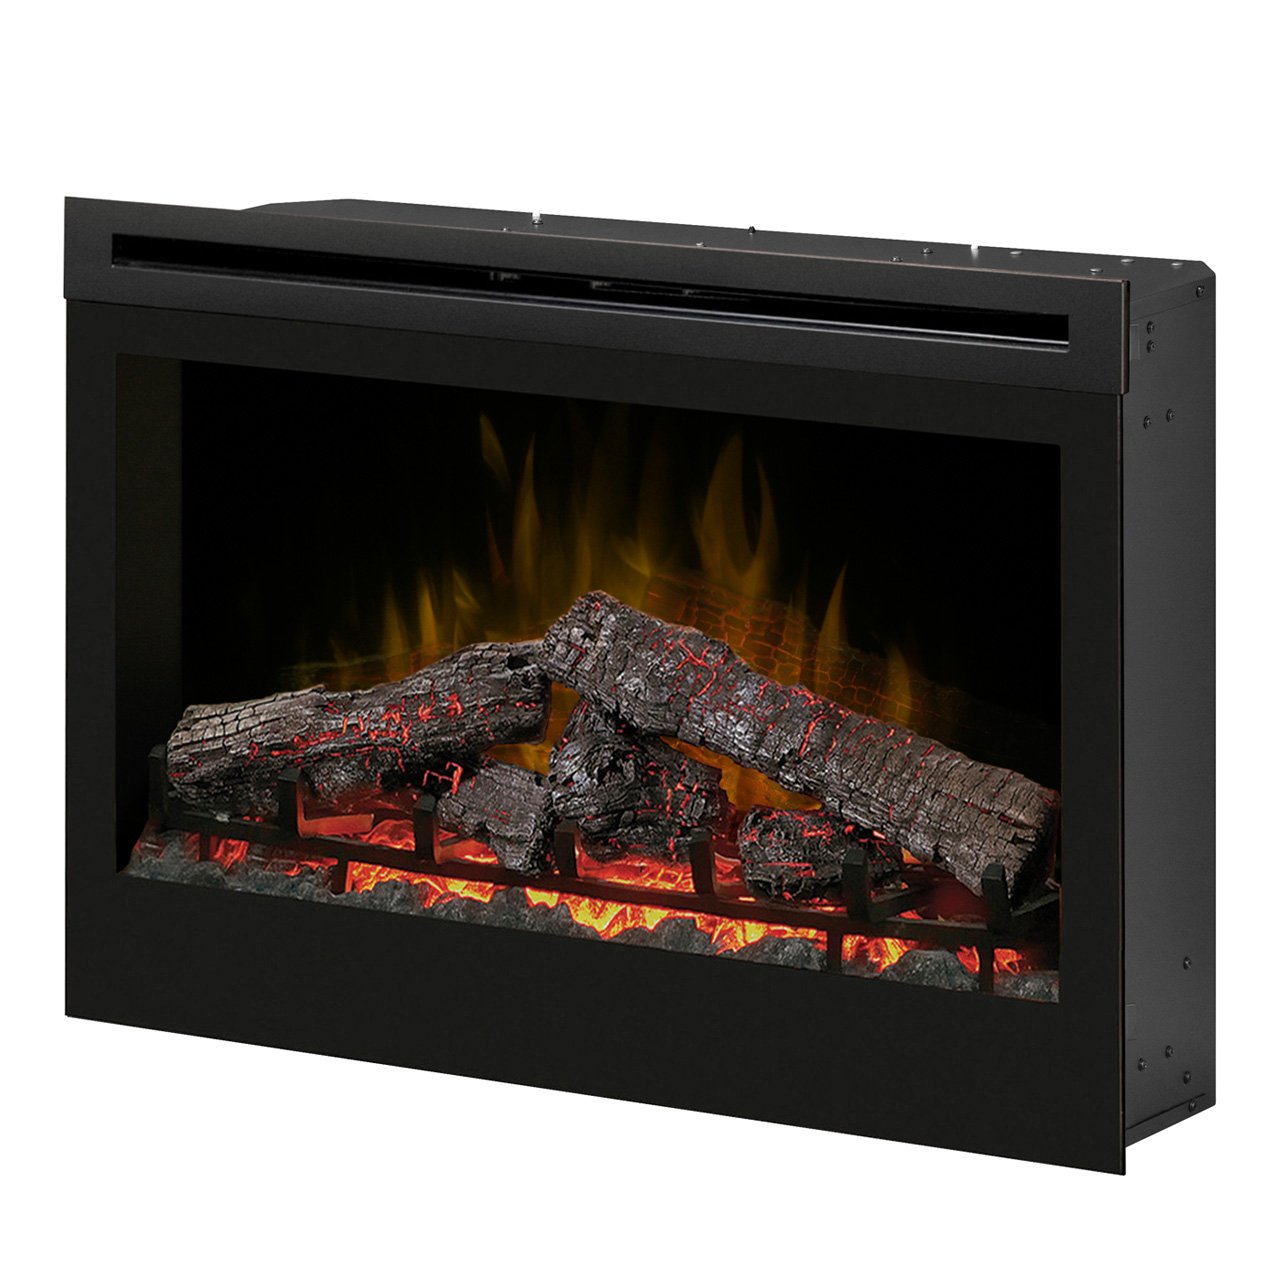 Fireplace Accessories Amazon Elegant Dimplex Df3033st 33 Inch Self Trimming Electric Fireplace Insert